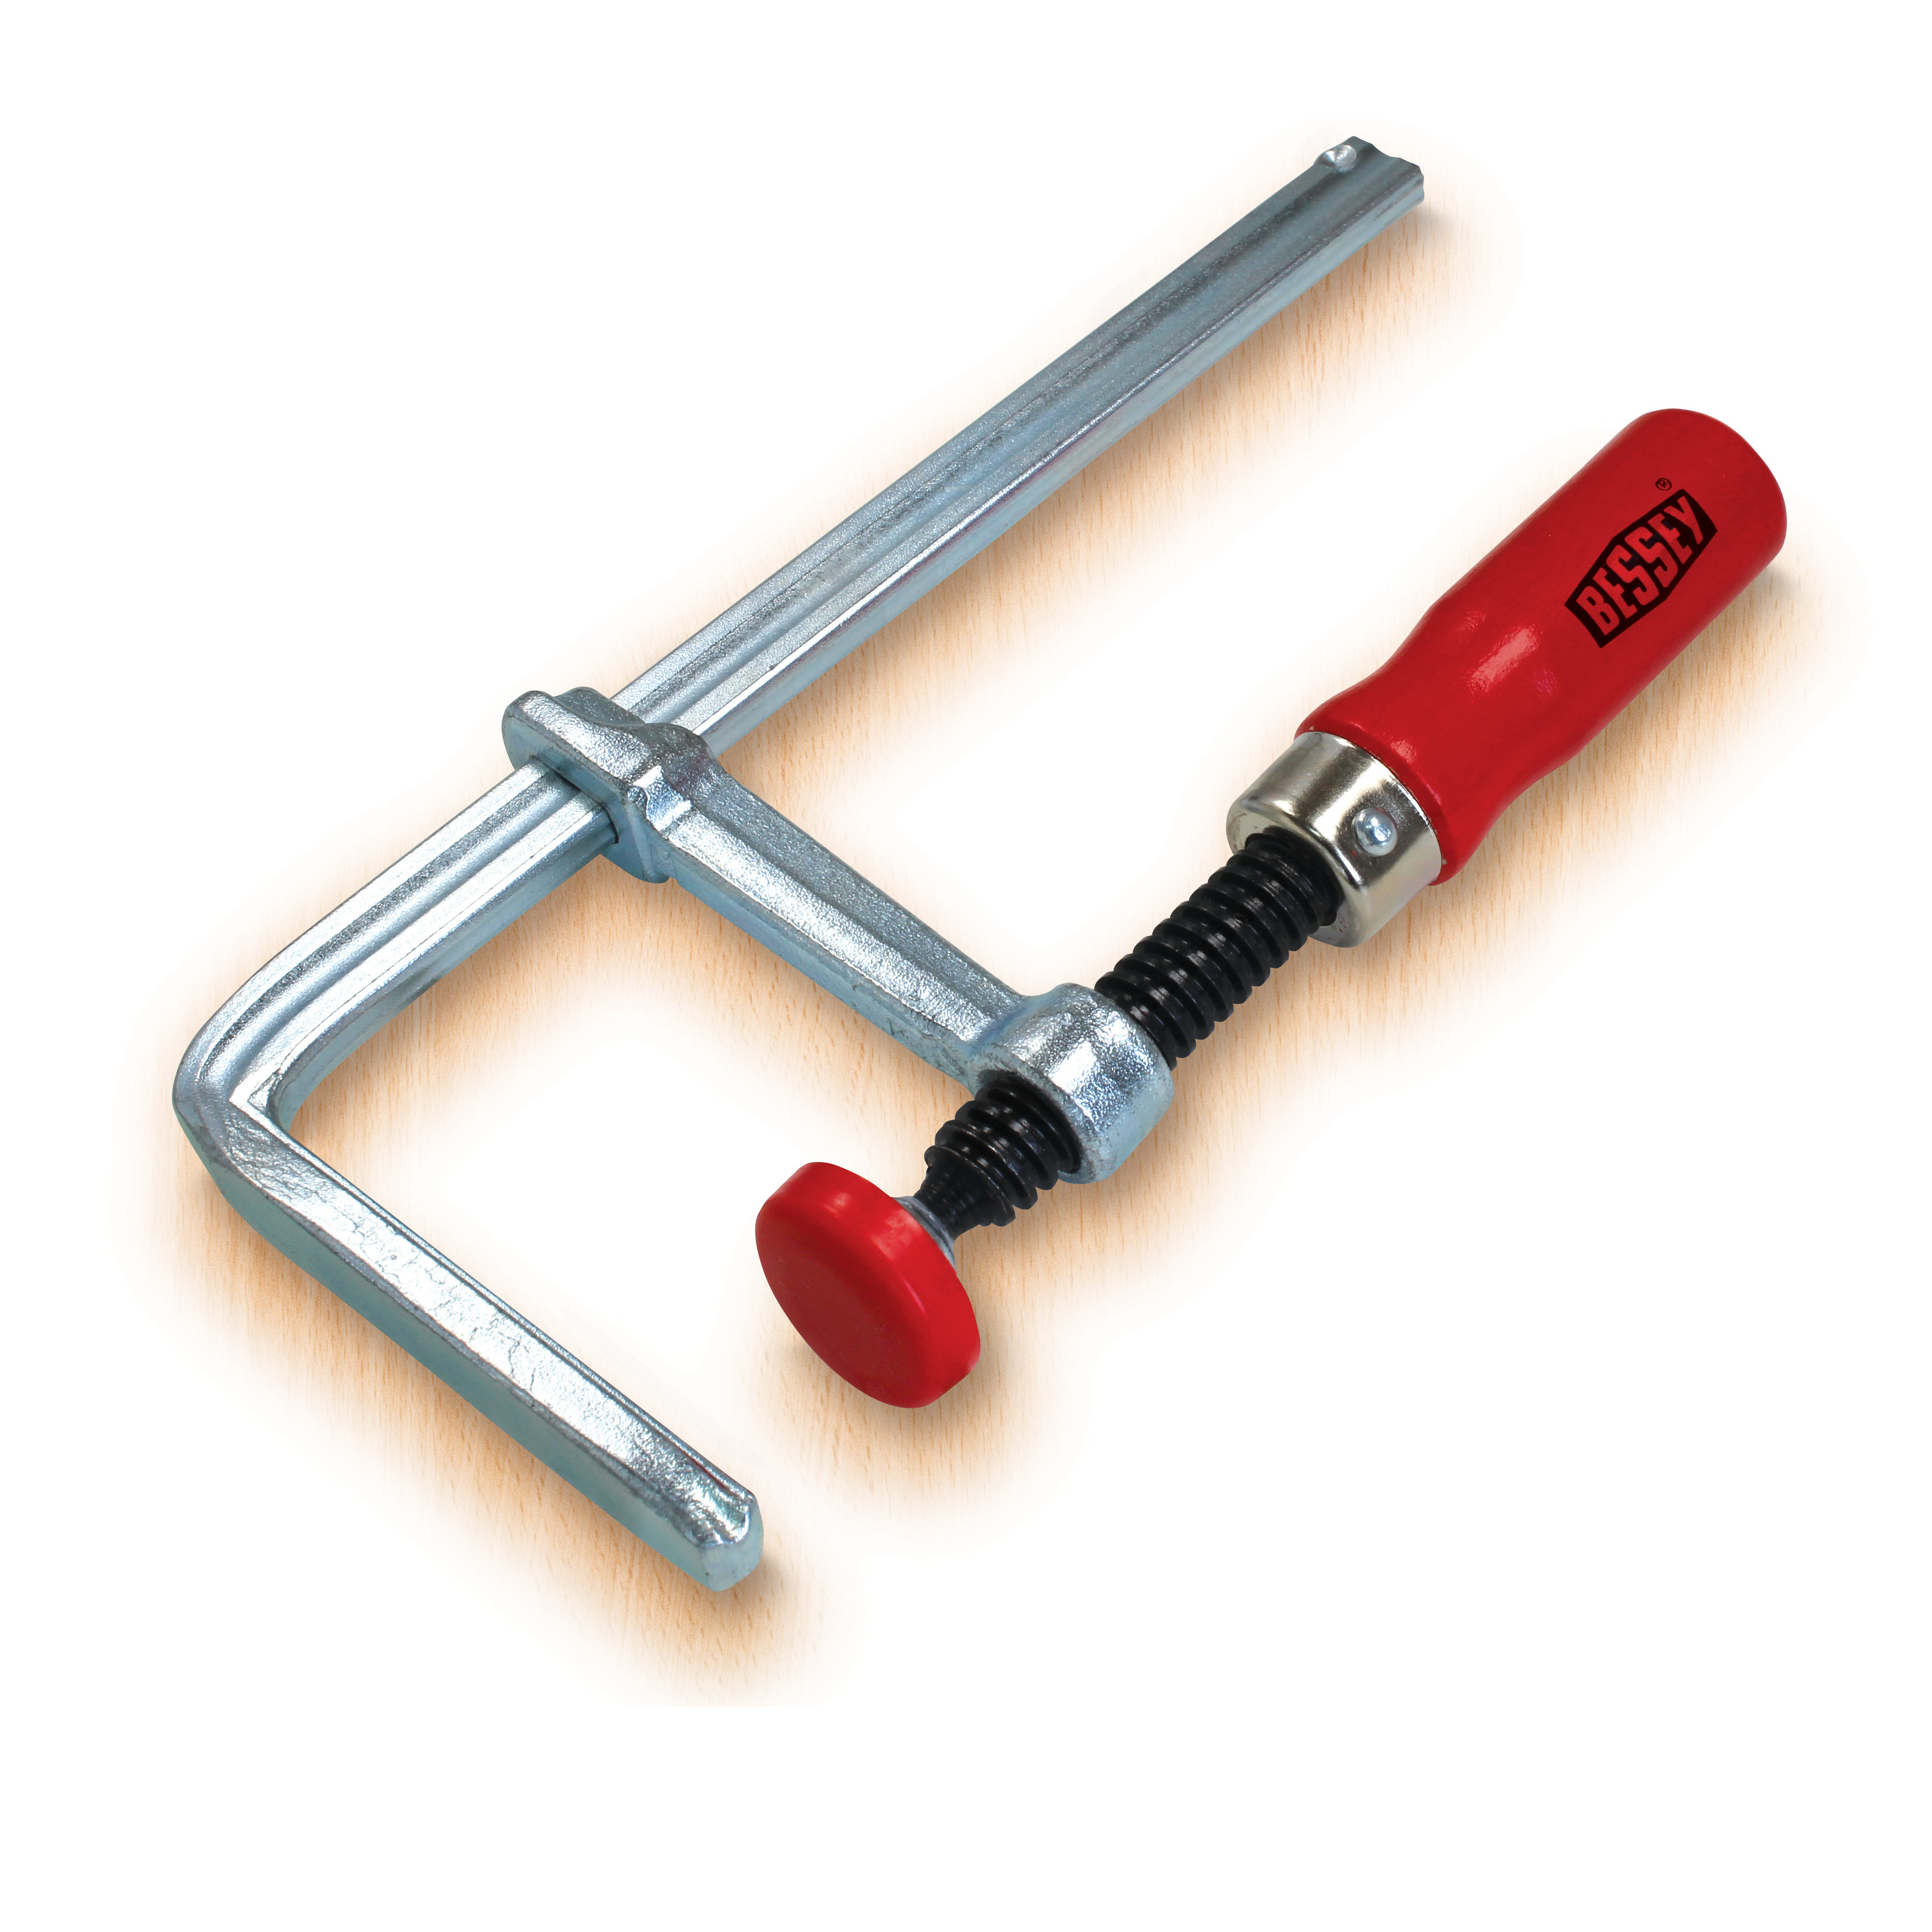 Bessey GTR16B6 Track/Table Clamp, 1.8 N Clamping, 11-13/16 in Max Opening Size, 2-5/16 in D Throat, Steel Body - 3